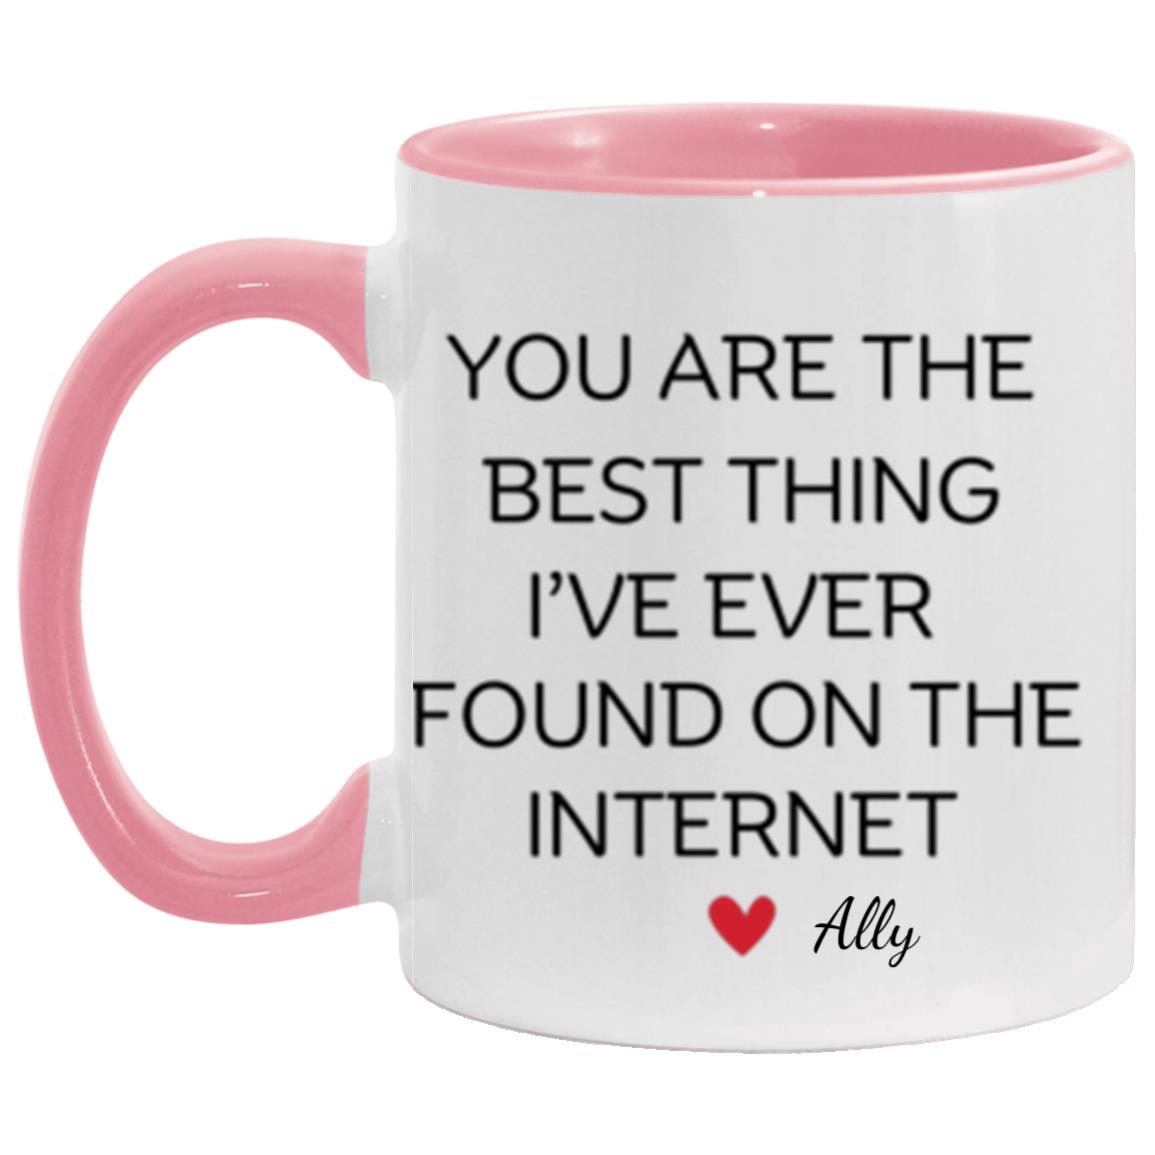 Get trendy with You are the best thing I've ever found on the internet (4) You are the Best Thing I Found on the Internet - Apparel available at Good Gift Company. Grab yours for $15.80 today!